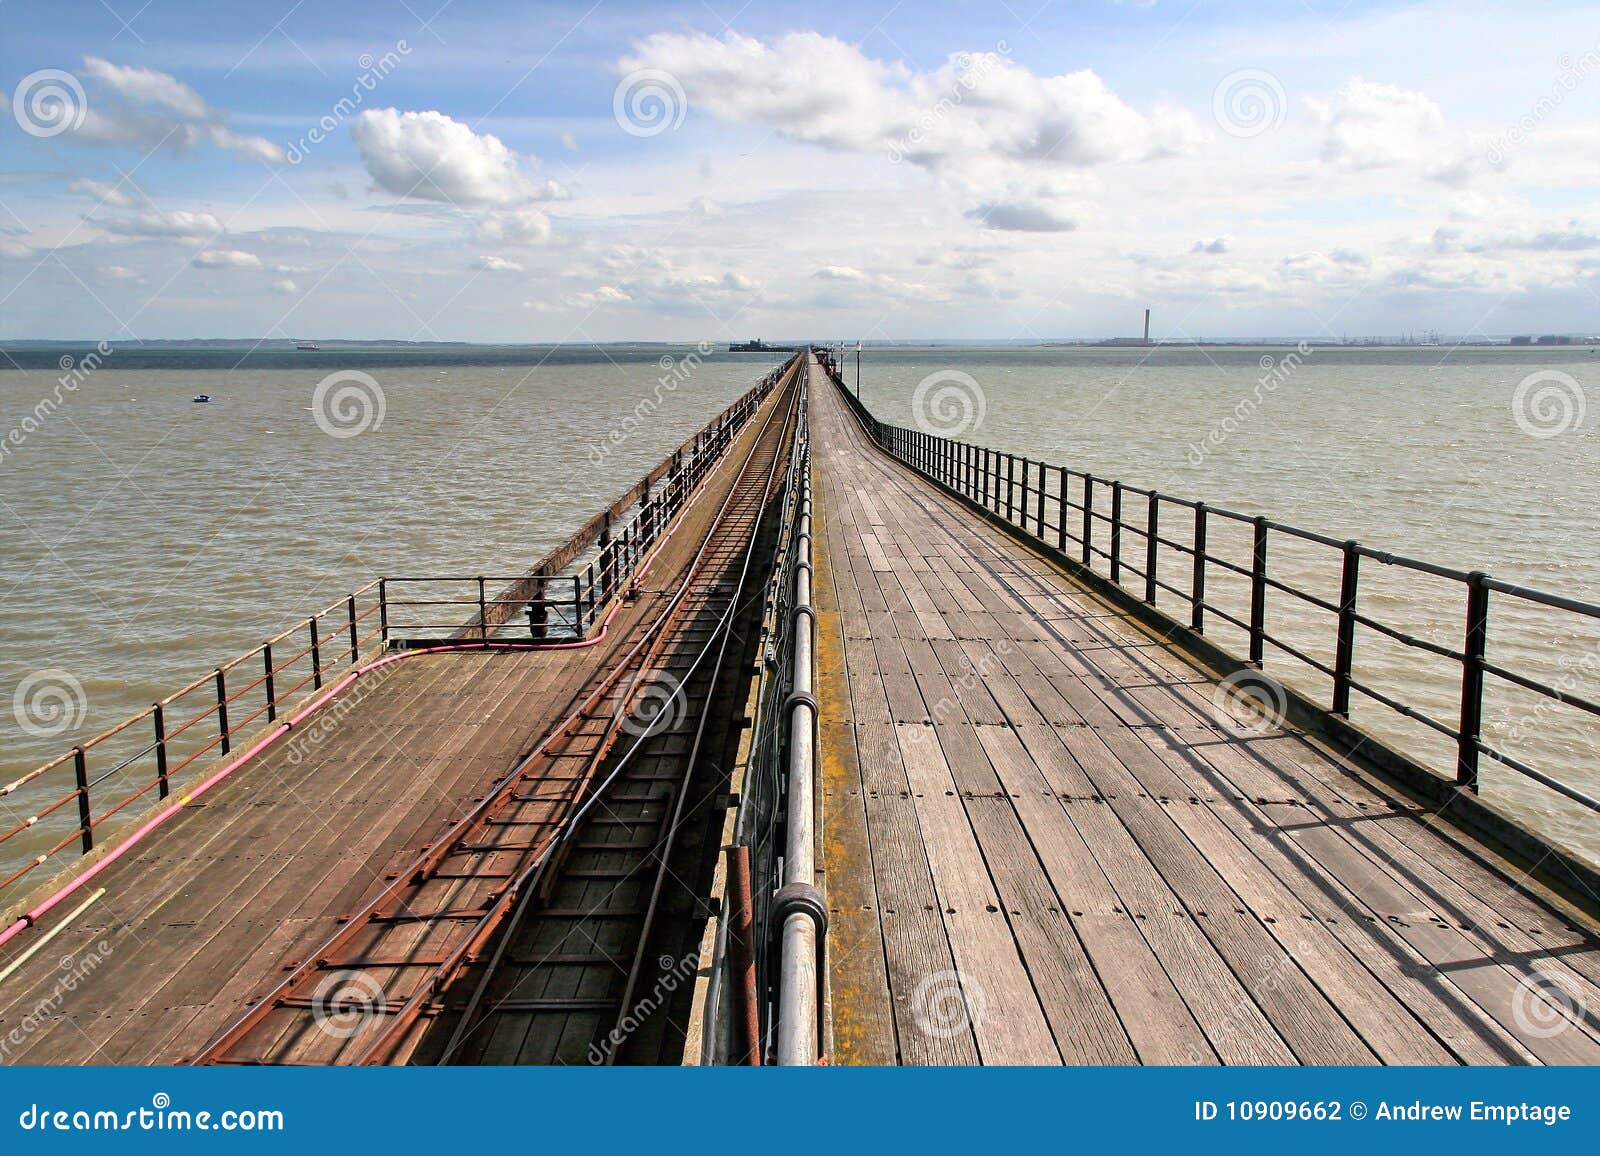  pier in the world with walkway to the right and railway track to left